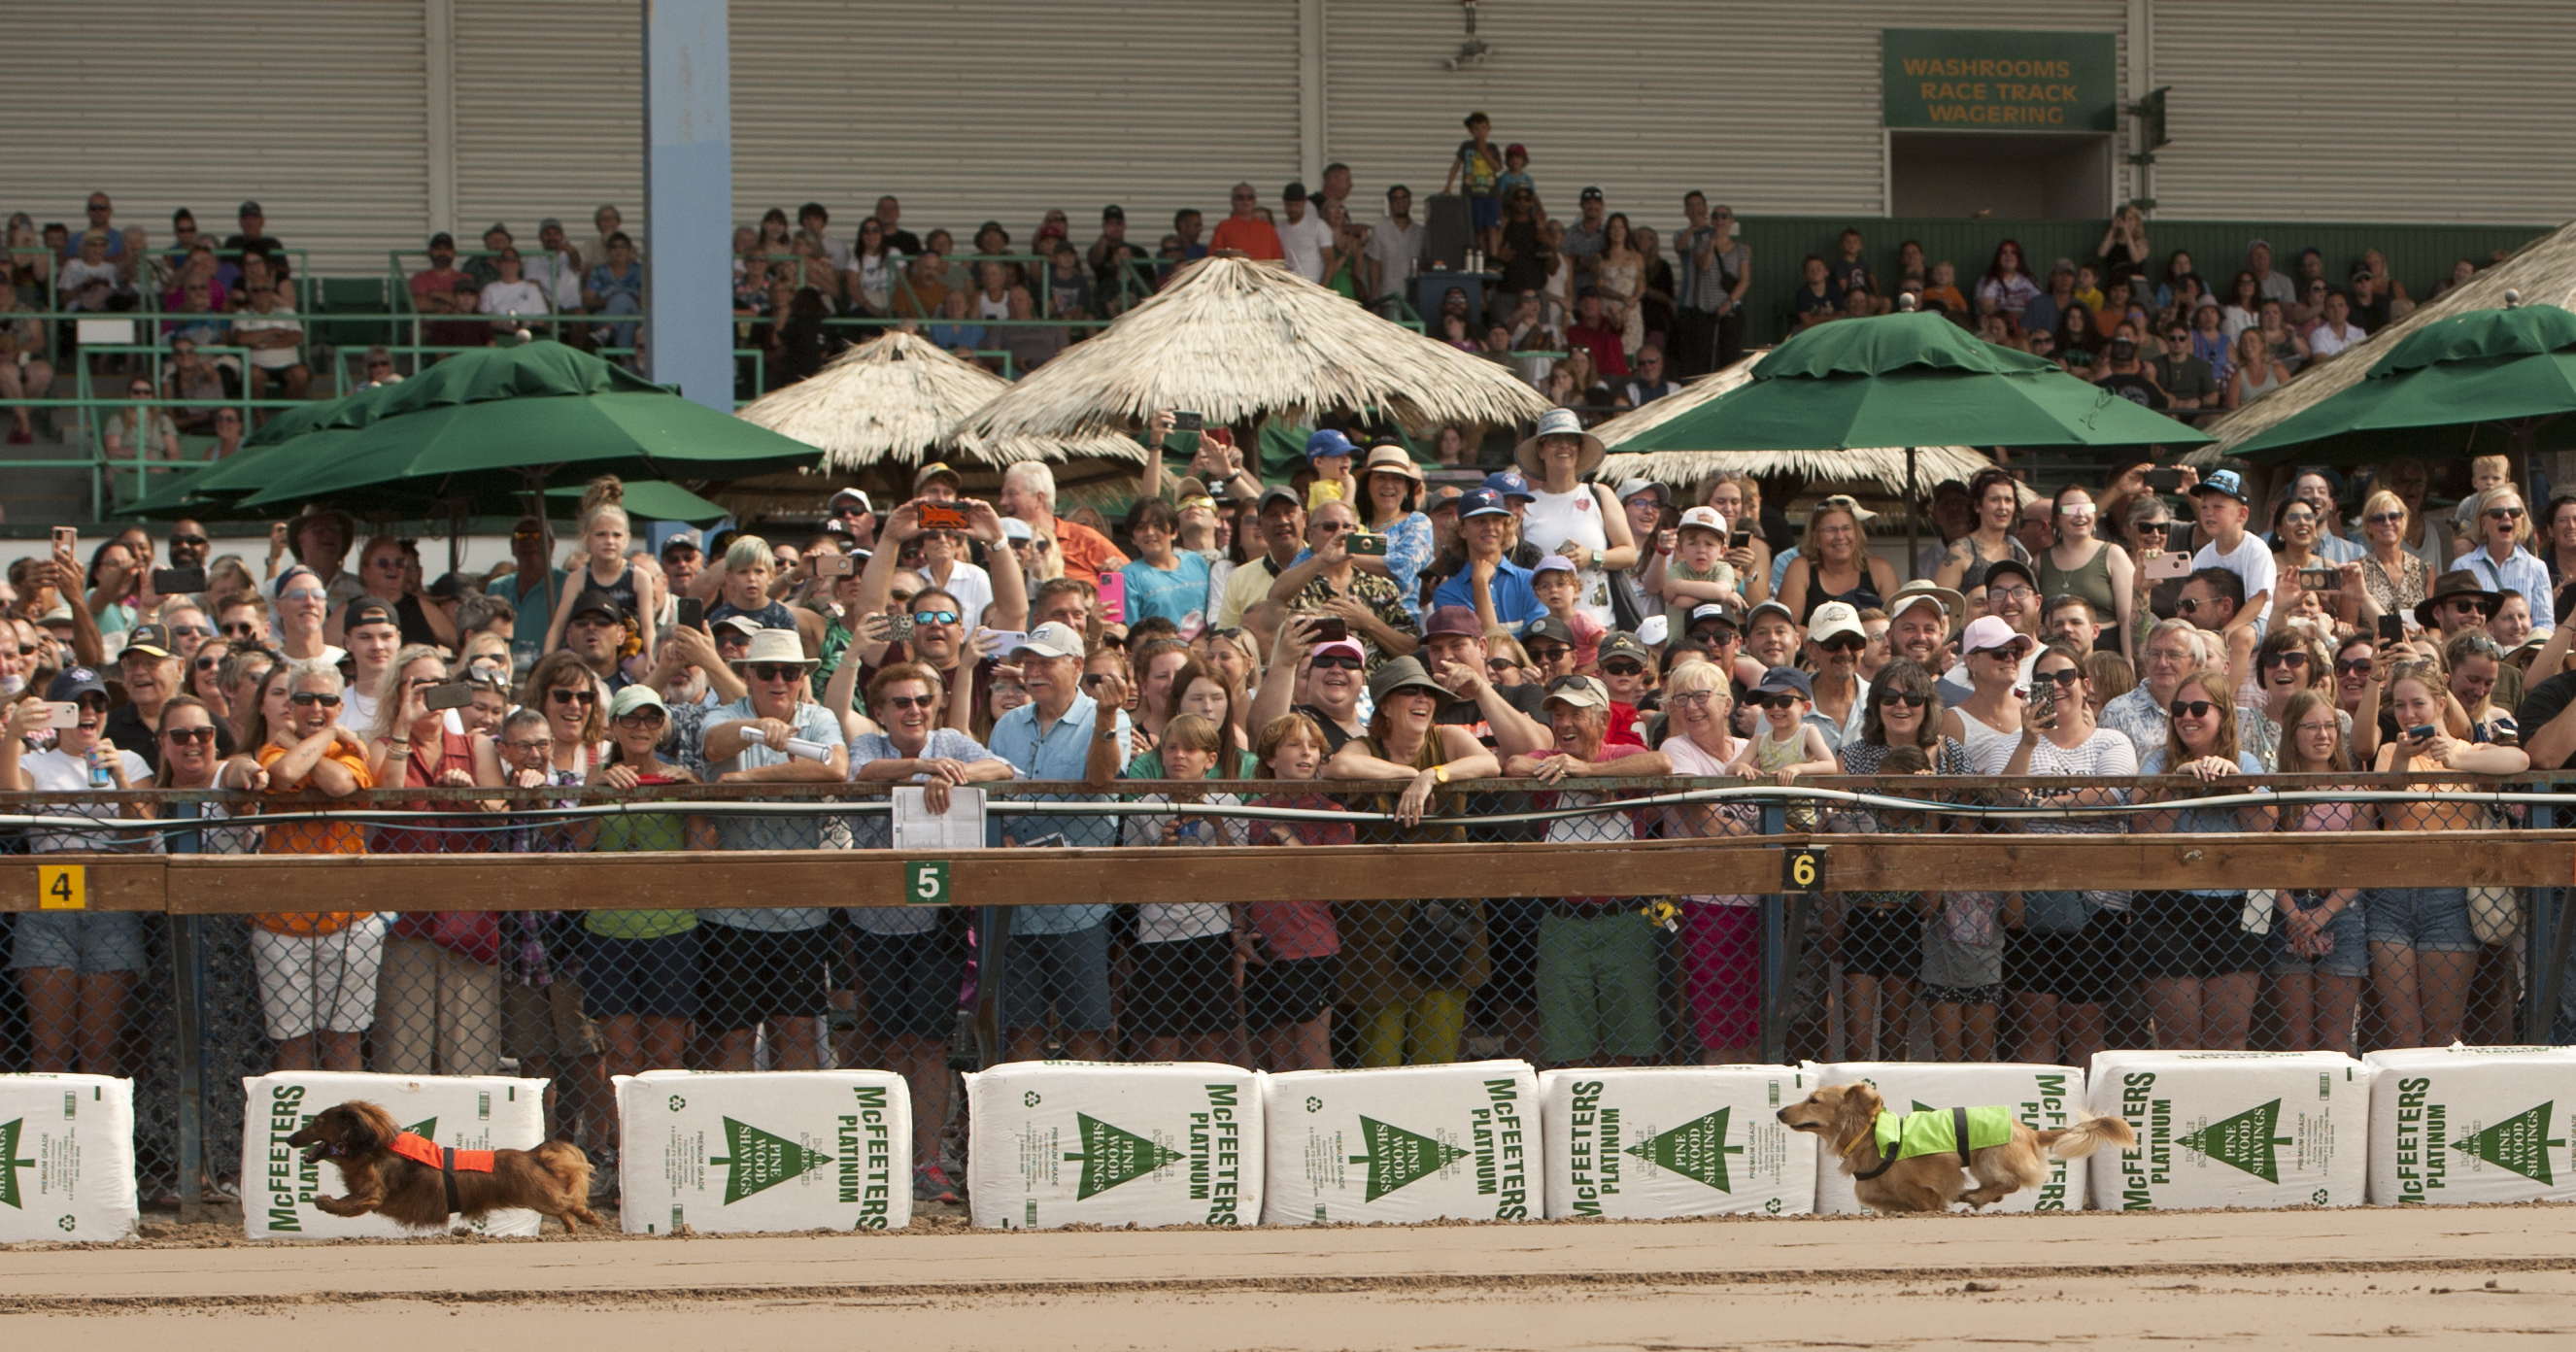 A capacity crowd was all smiles as they took in the action during the wiener dog races on July 16 at the Fort Erie Race Track.